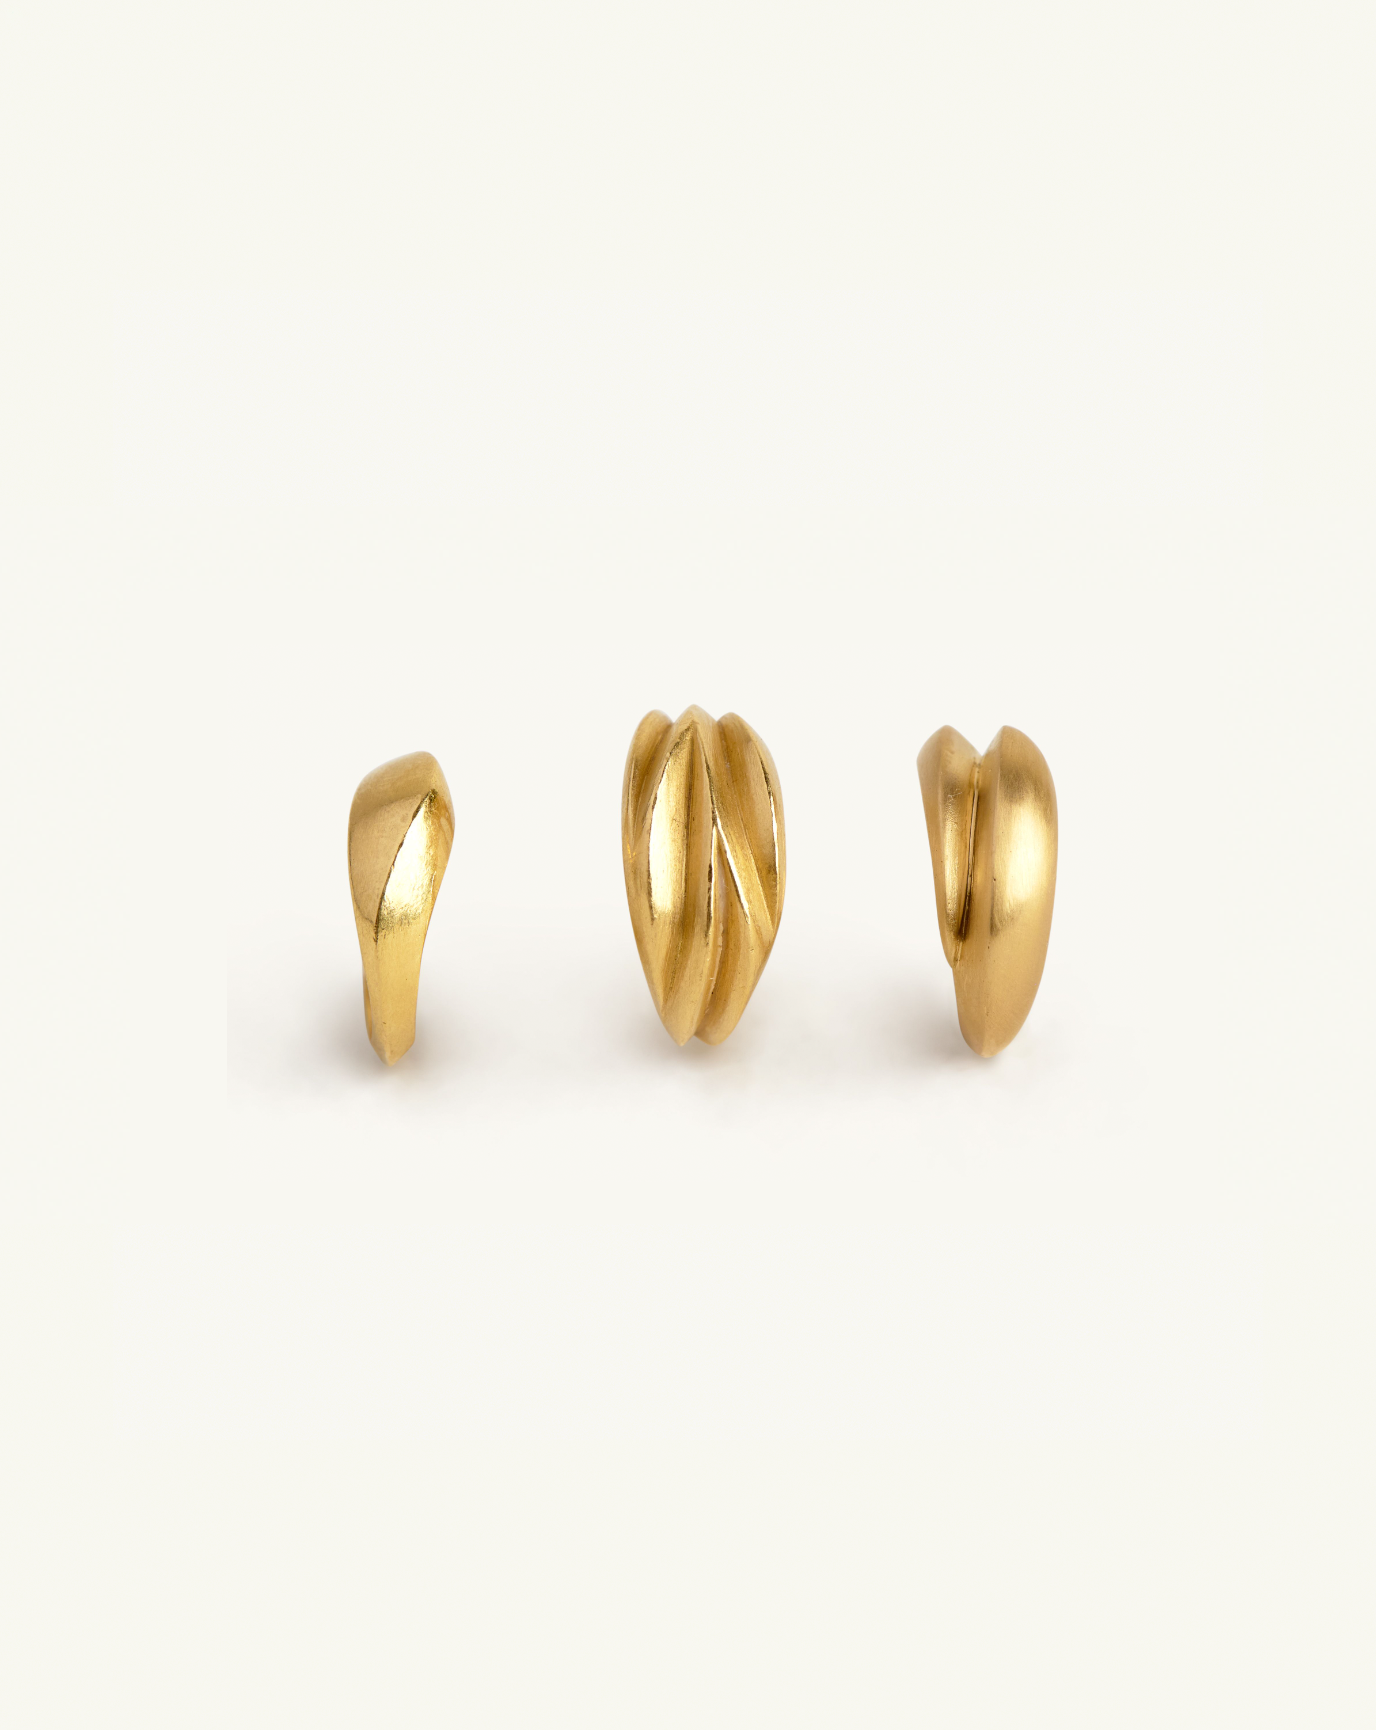 Group product image of the three sculptural rings in gold